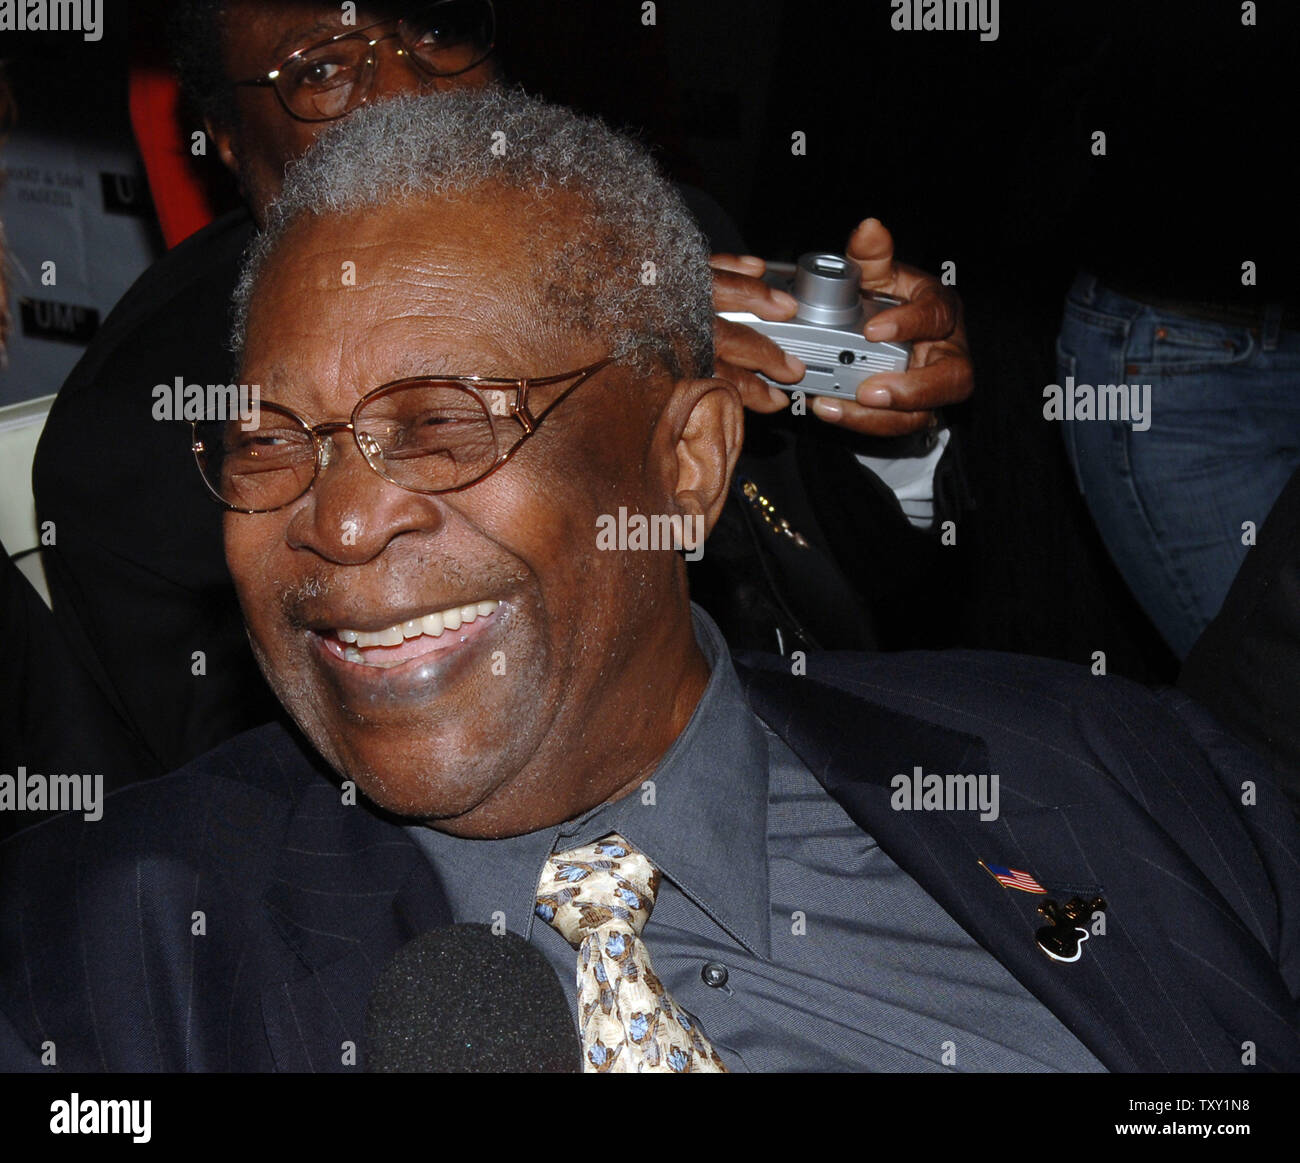 Blues legend B.B. King arrives for a celebration and fundraiser in honor of his 80th birthday at a private residence in Encino, California September 20, 2005. The event will benefit the forthcoming B.B. King Museum in Indianola, Mississippi.   (UPI Photo/Jim Ruymen) Stock Photo